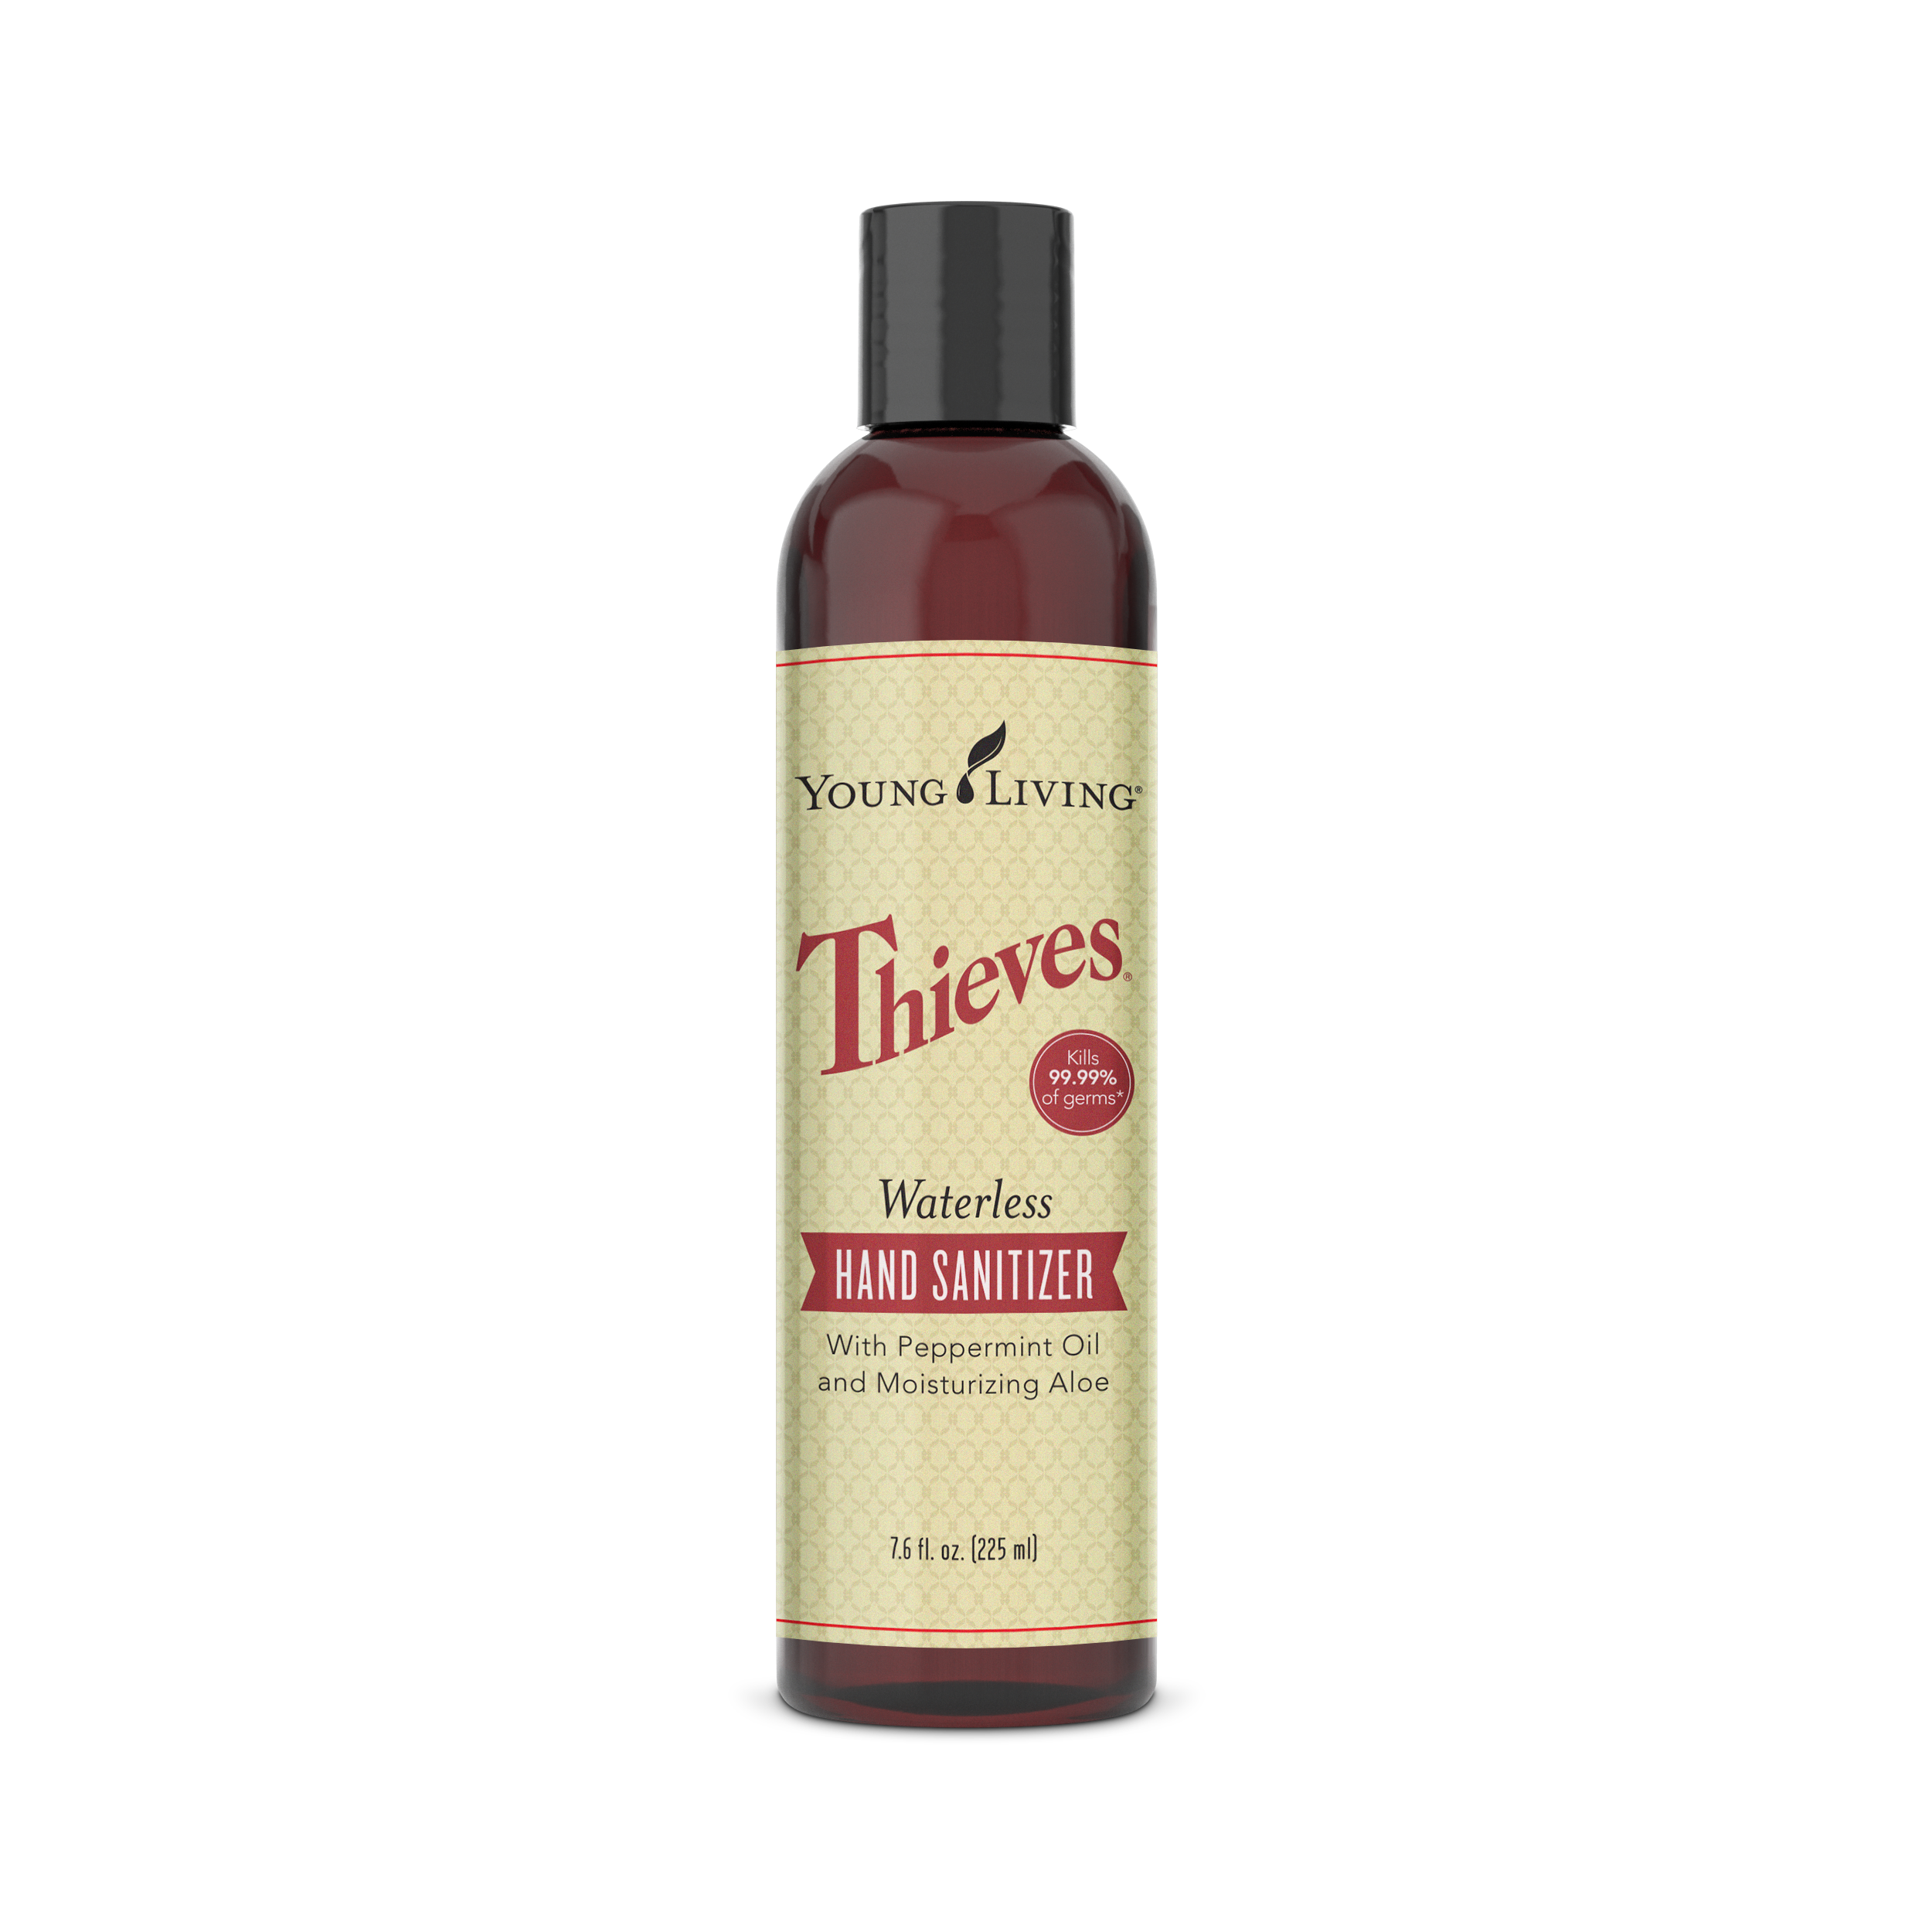 Thieves Hand Sanitizer 7.6oz Silo.png